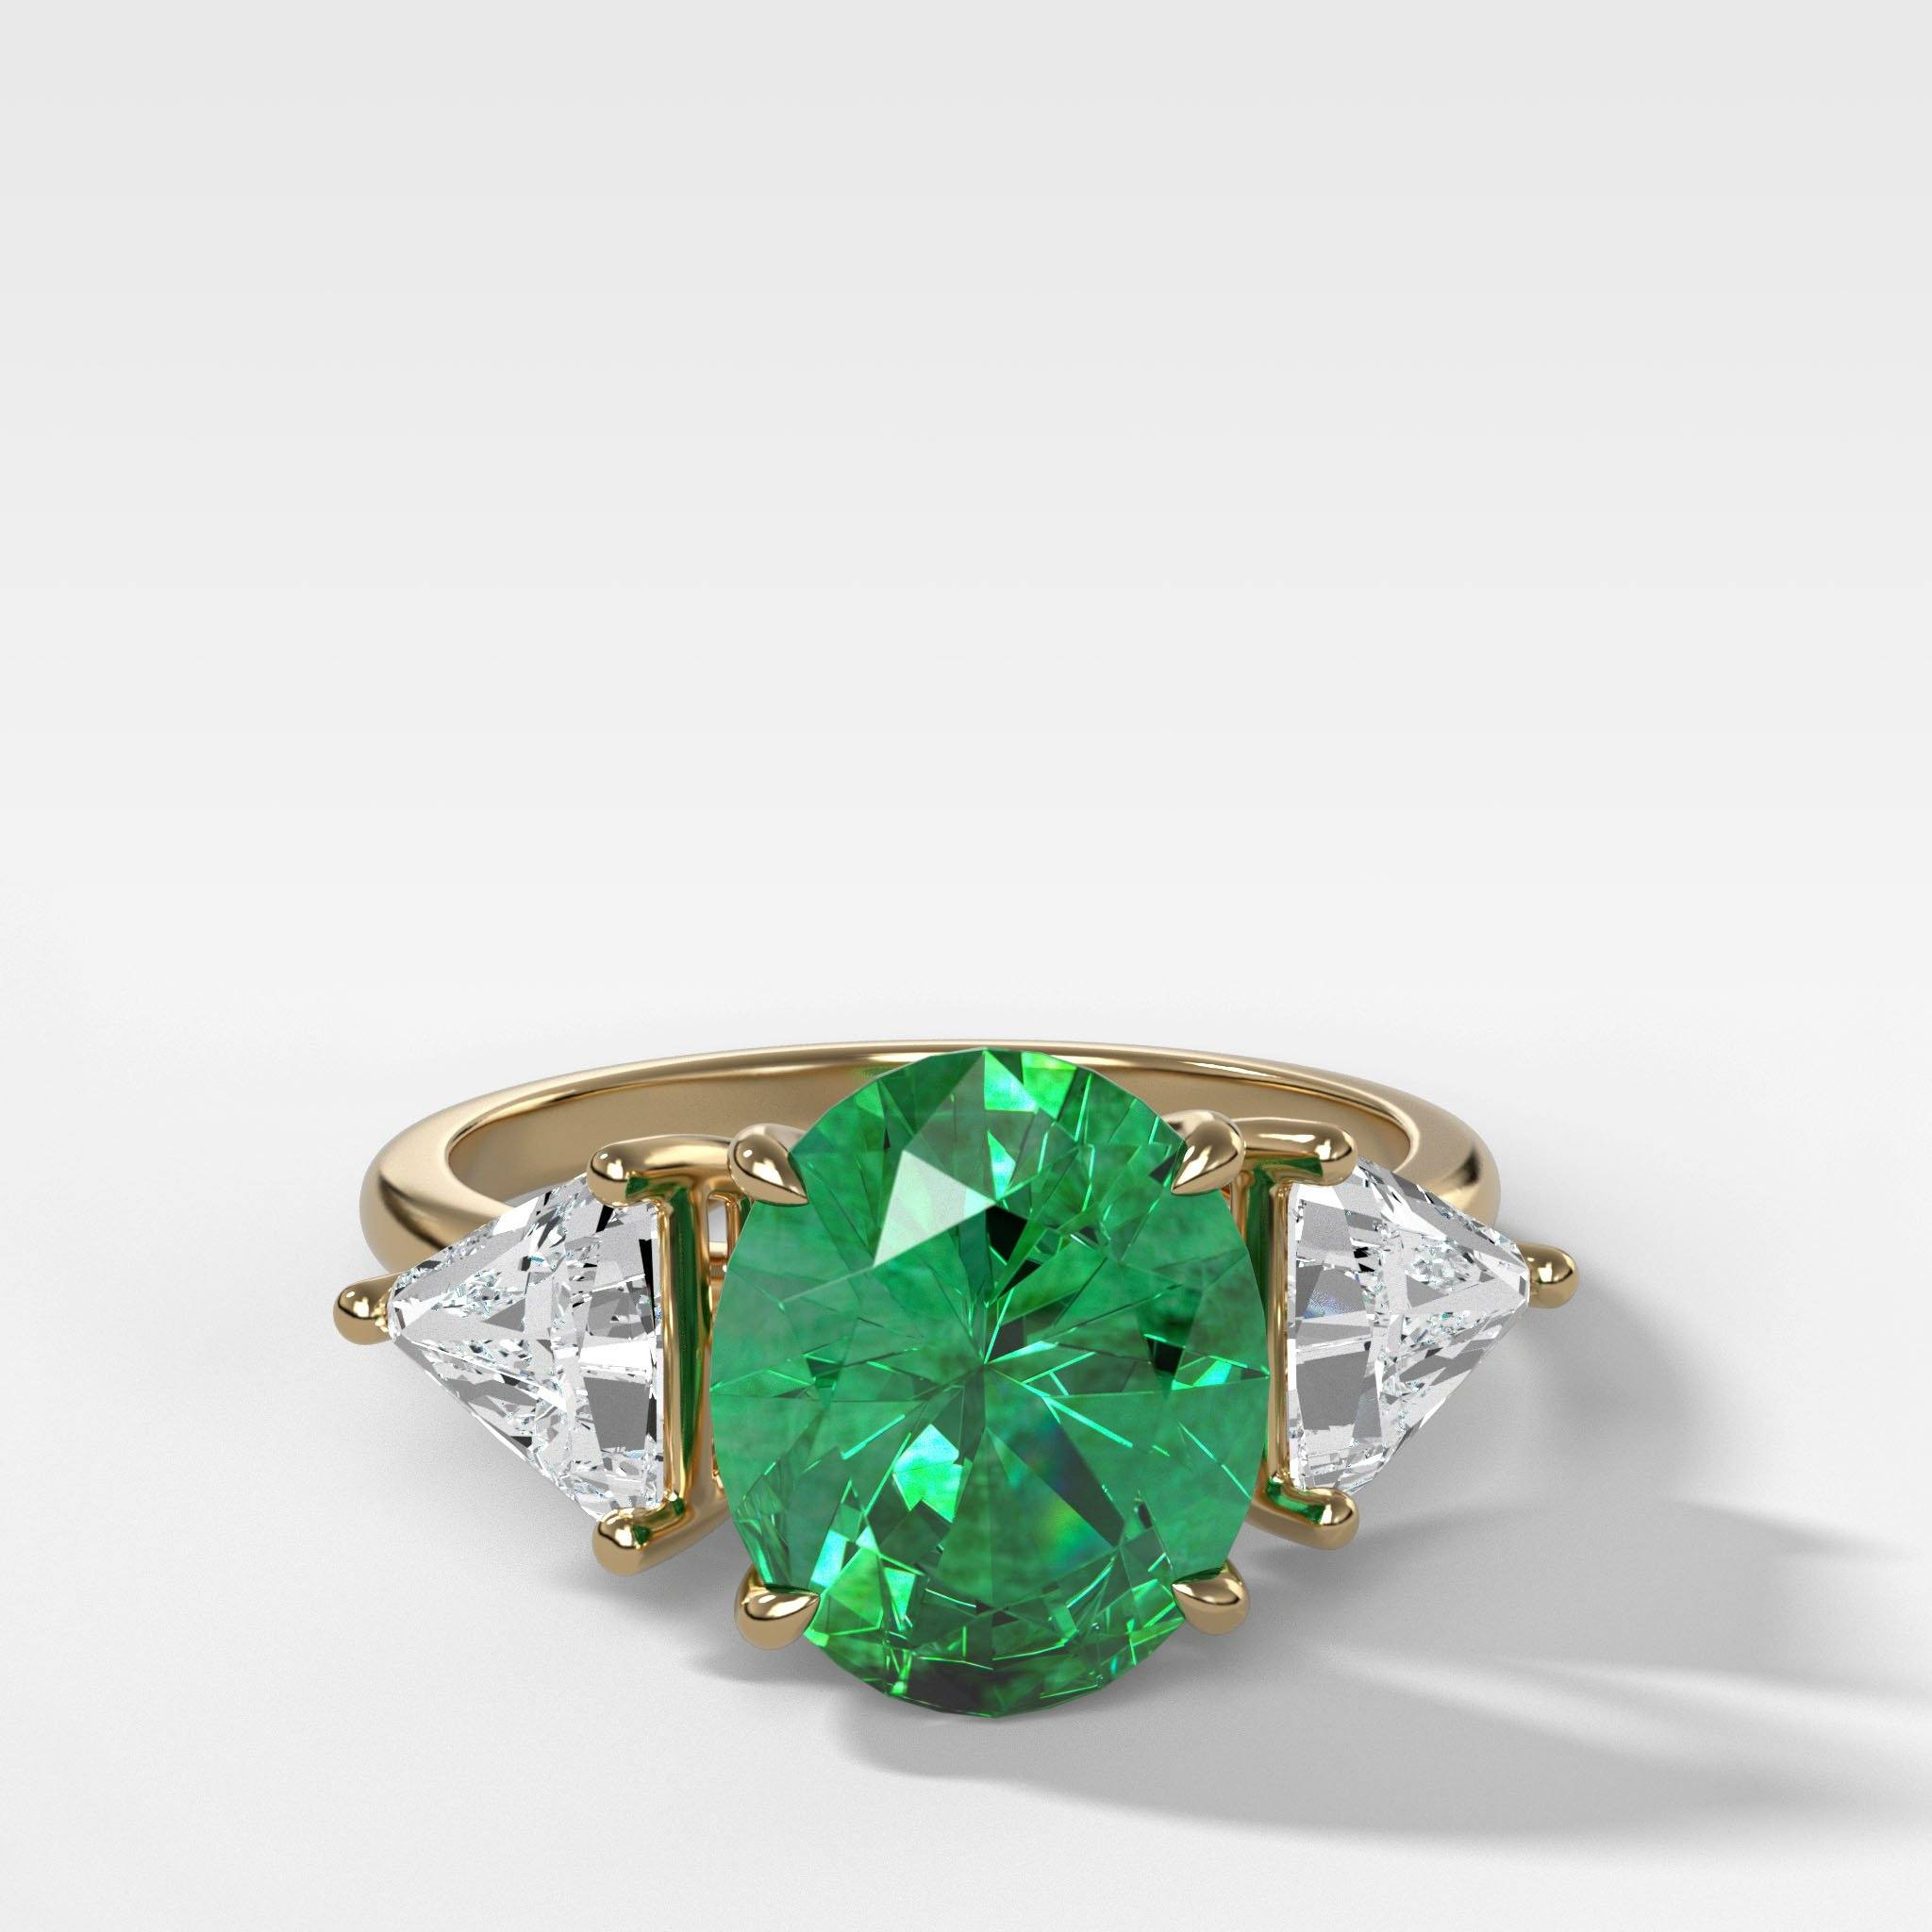 GOODSTONE Oval Cut Emerald Three Stone Engagement Ring With Trilliant Cut Diamond Sides